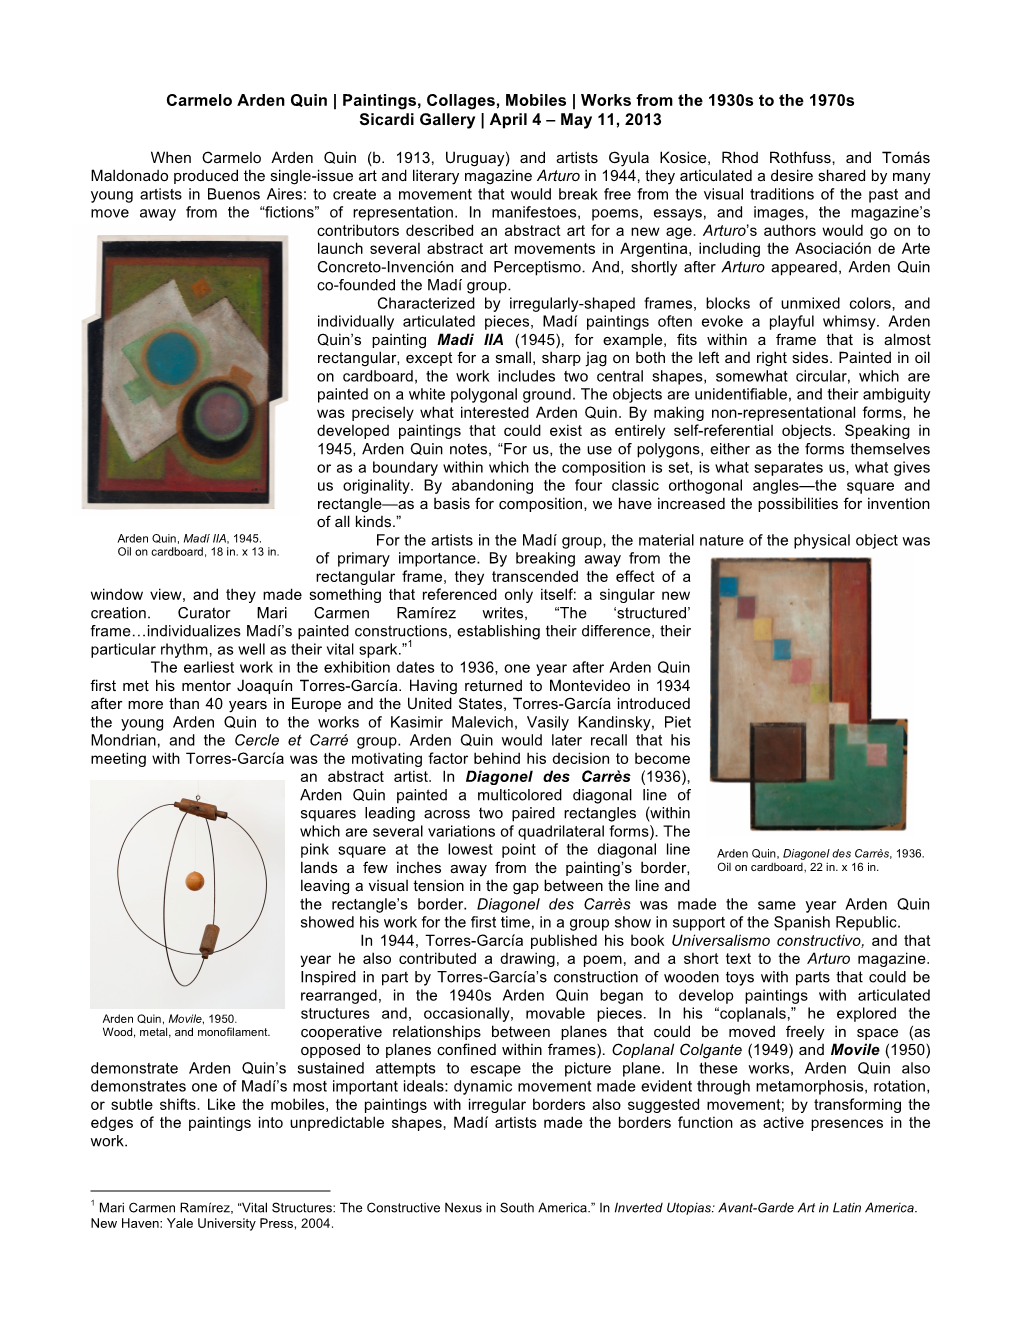 Carmelo Arden Quin | Paintings, Collages, Mobiles | Works from the 1930S to the 1970S Sicardi Gallery | April 4 – May 11, 2013